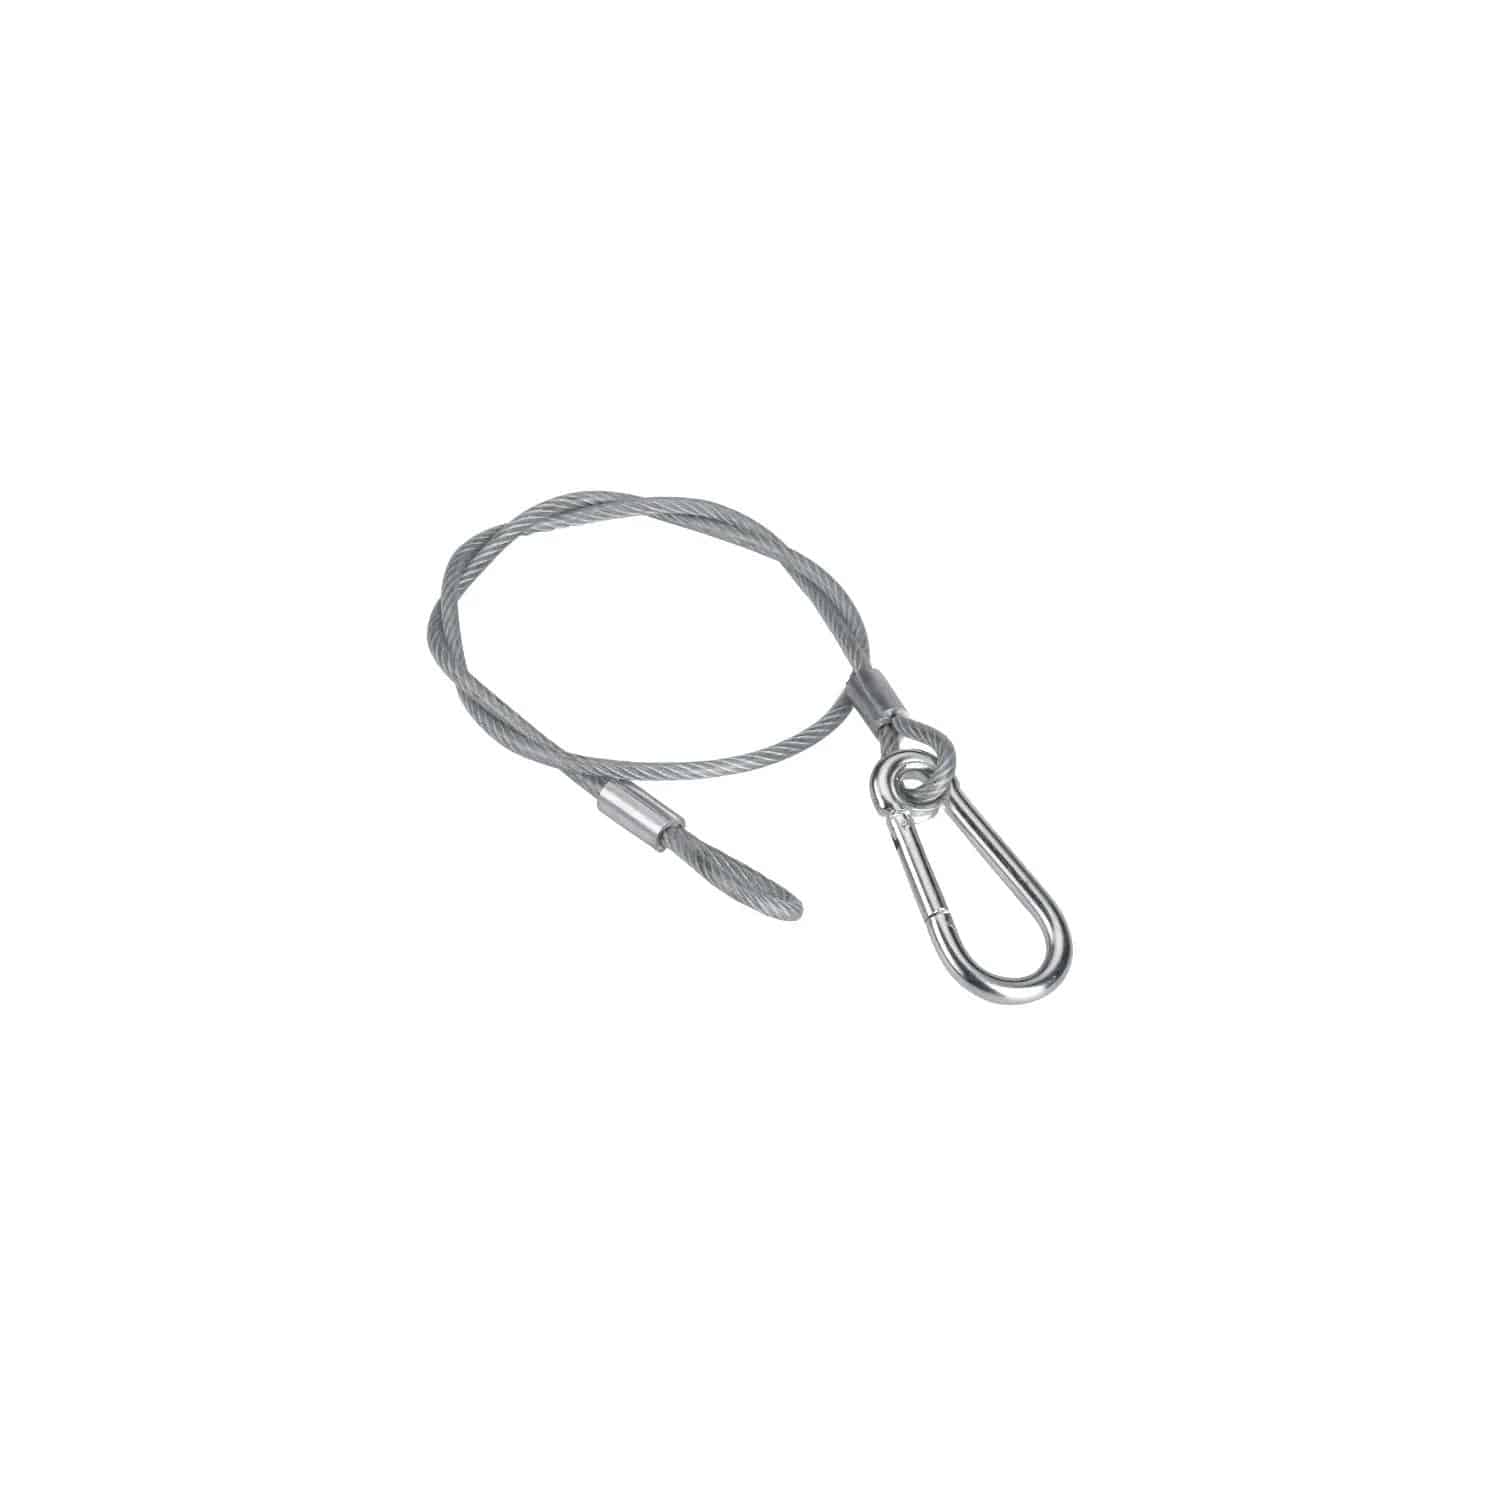 Odyssey LASC304, 30-Inches Long Medium-Duty Safety Cable With Standard Size Spring Hook - Hollywood DJ